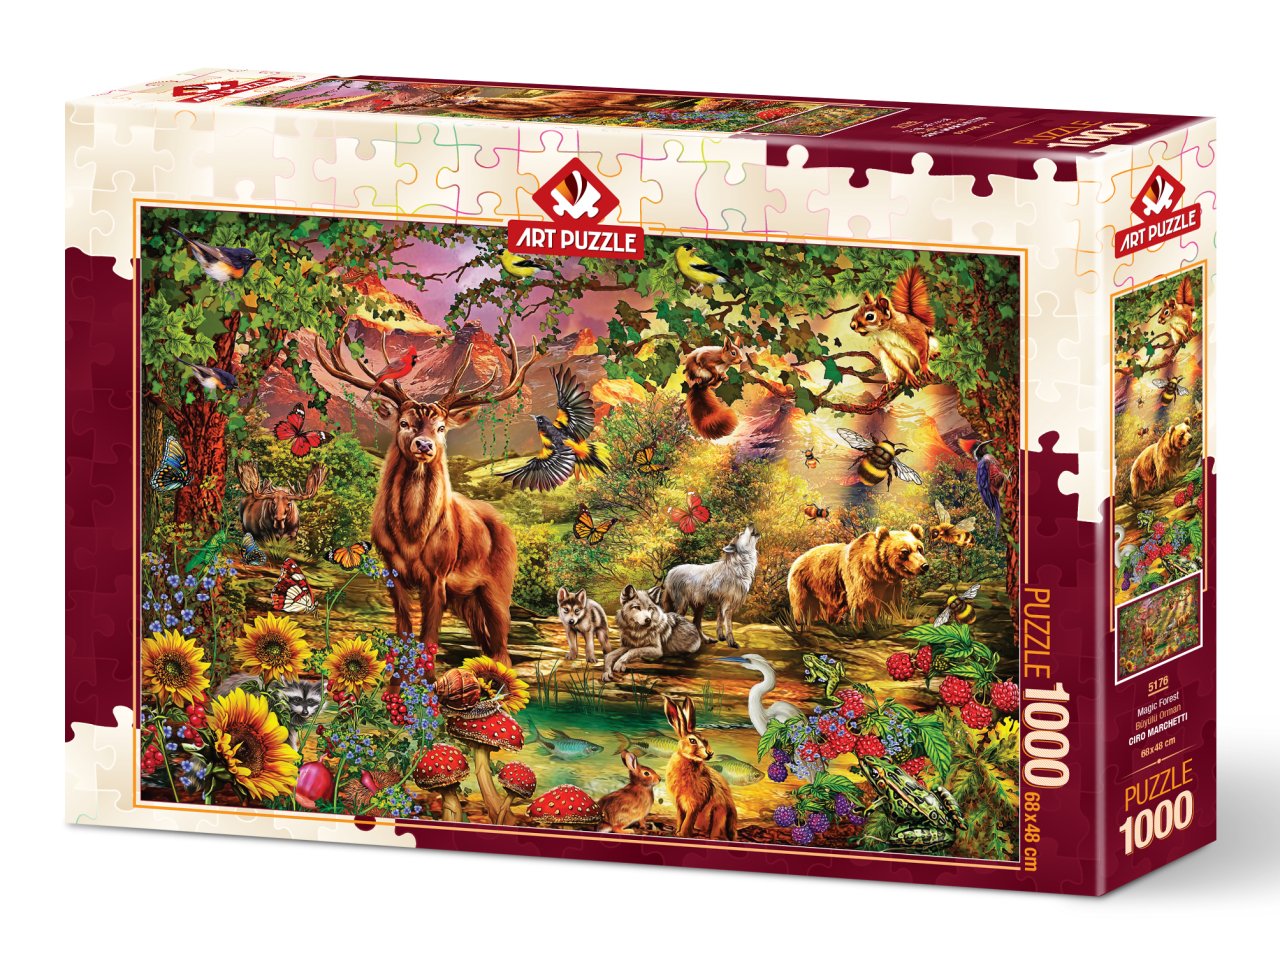 Art Puzzle - Enchanted Forest - 1000 piece jigsaw puzzle